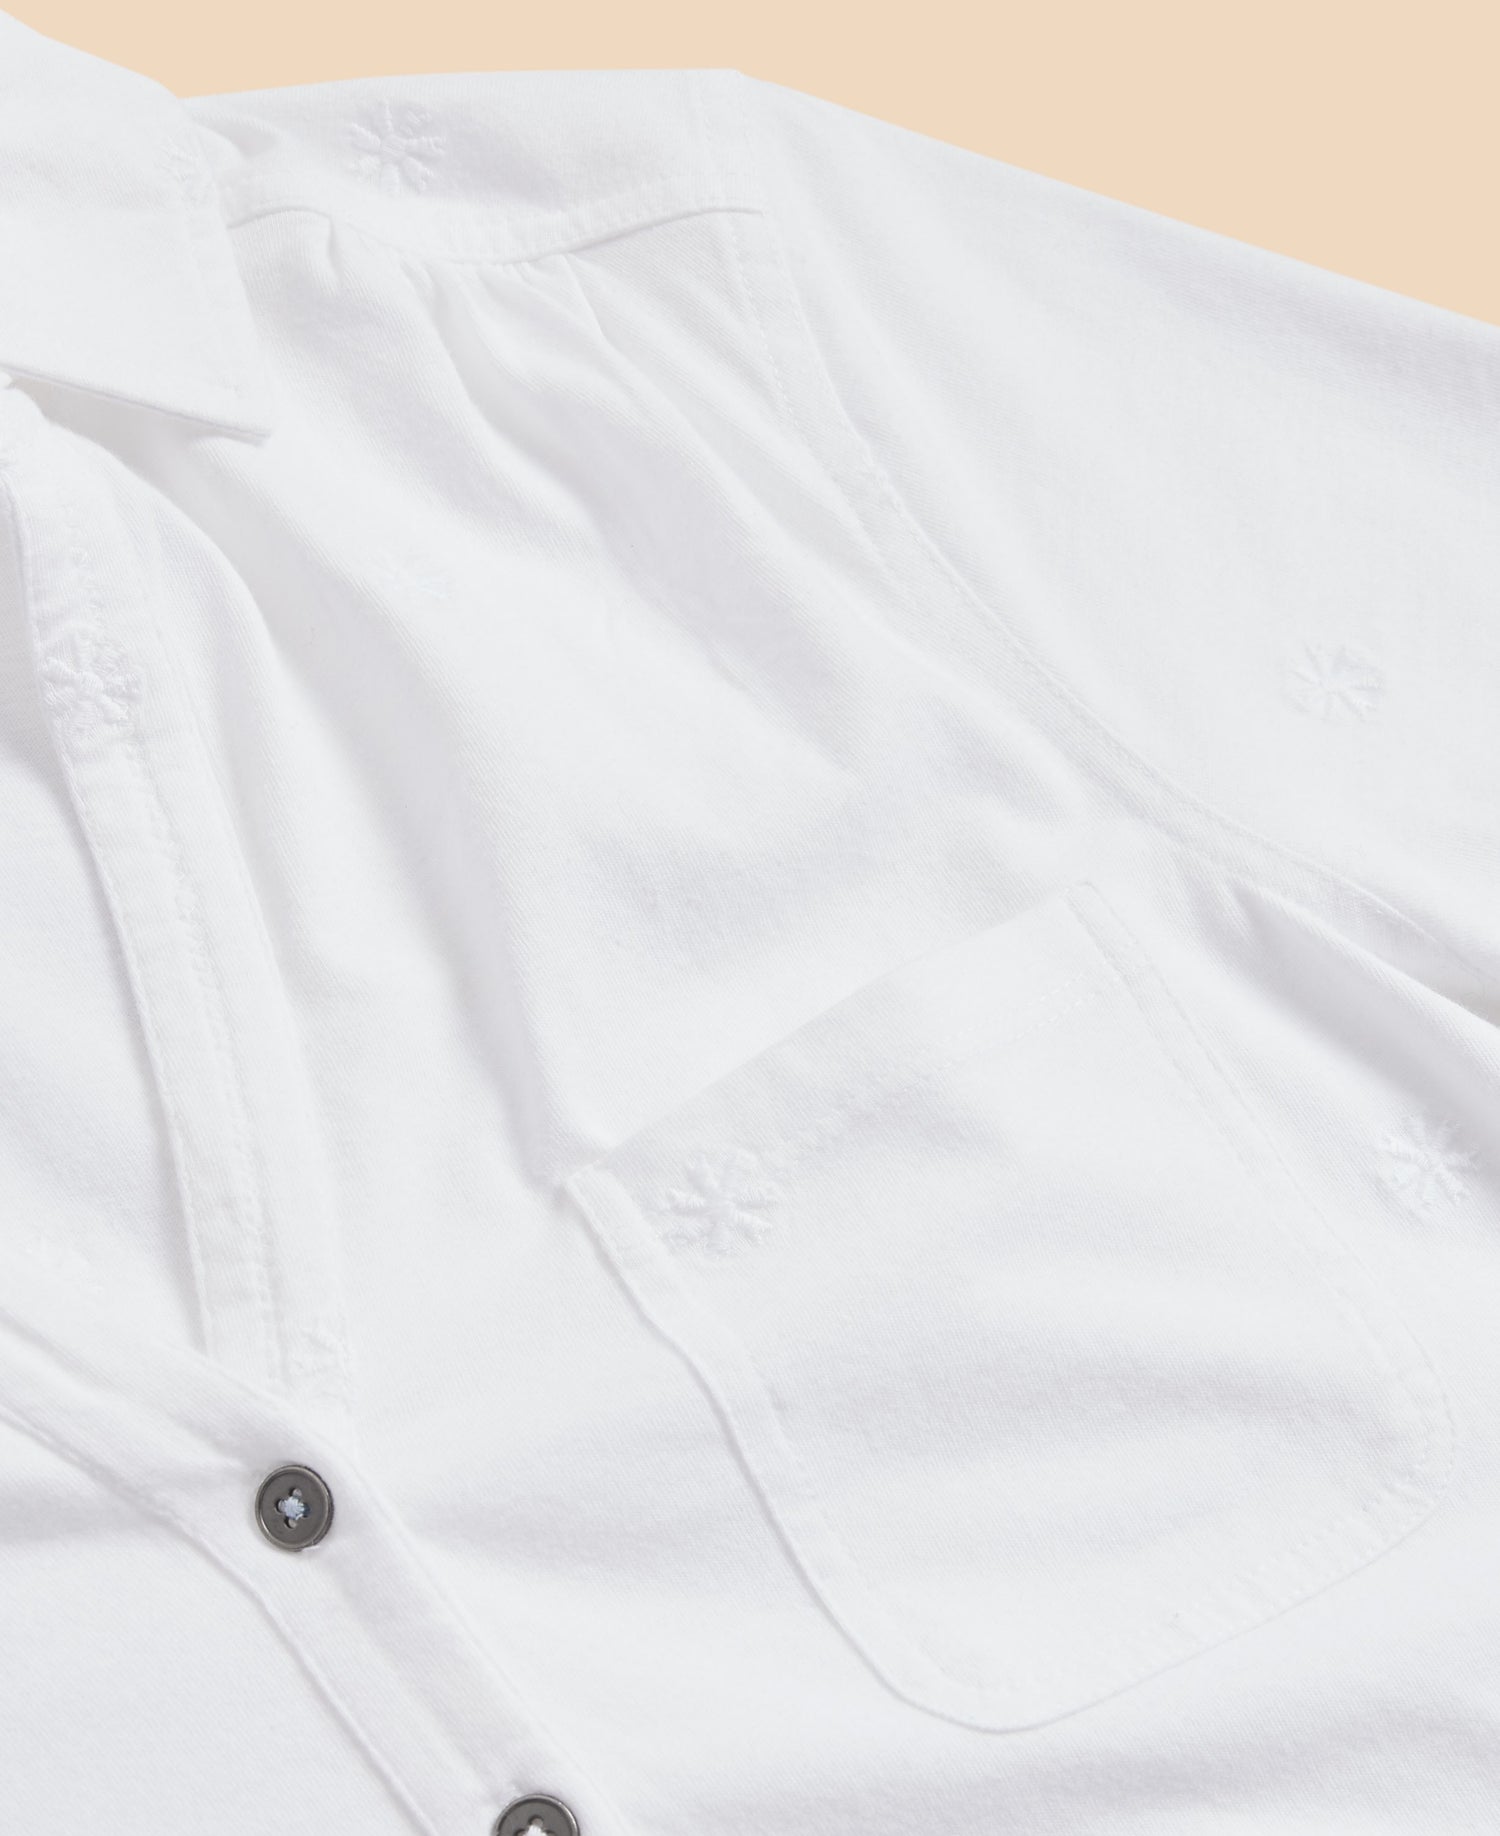 Penny Pocket Embroidered Shirt - Pale Ivory